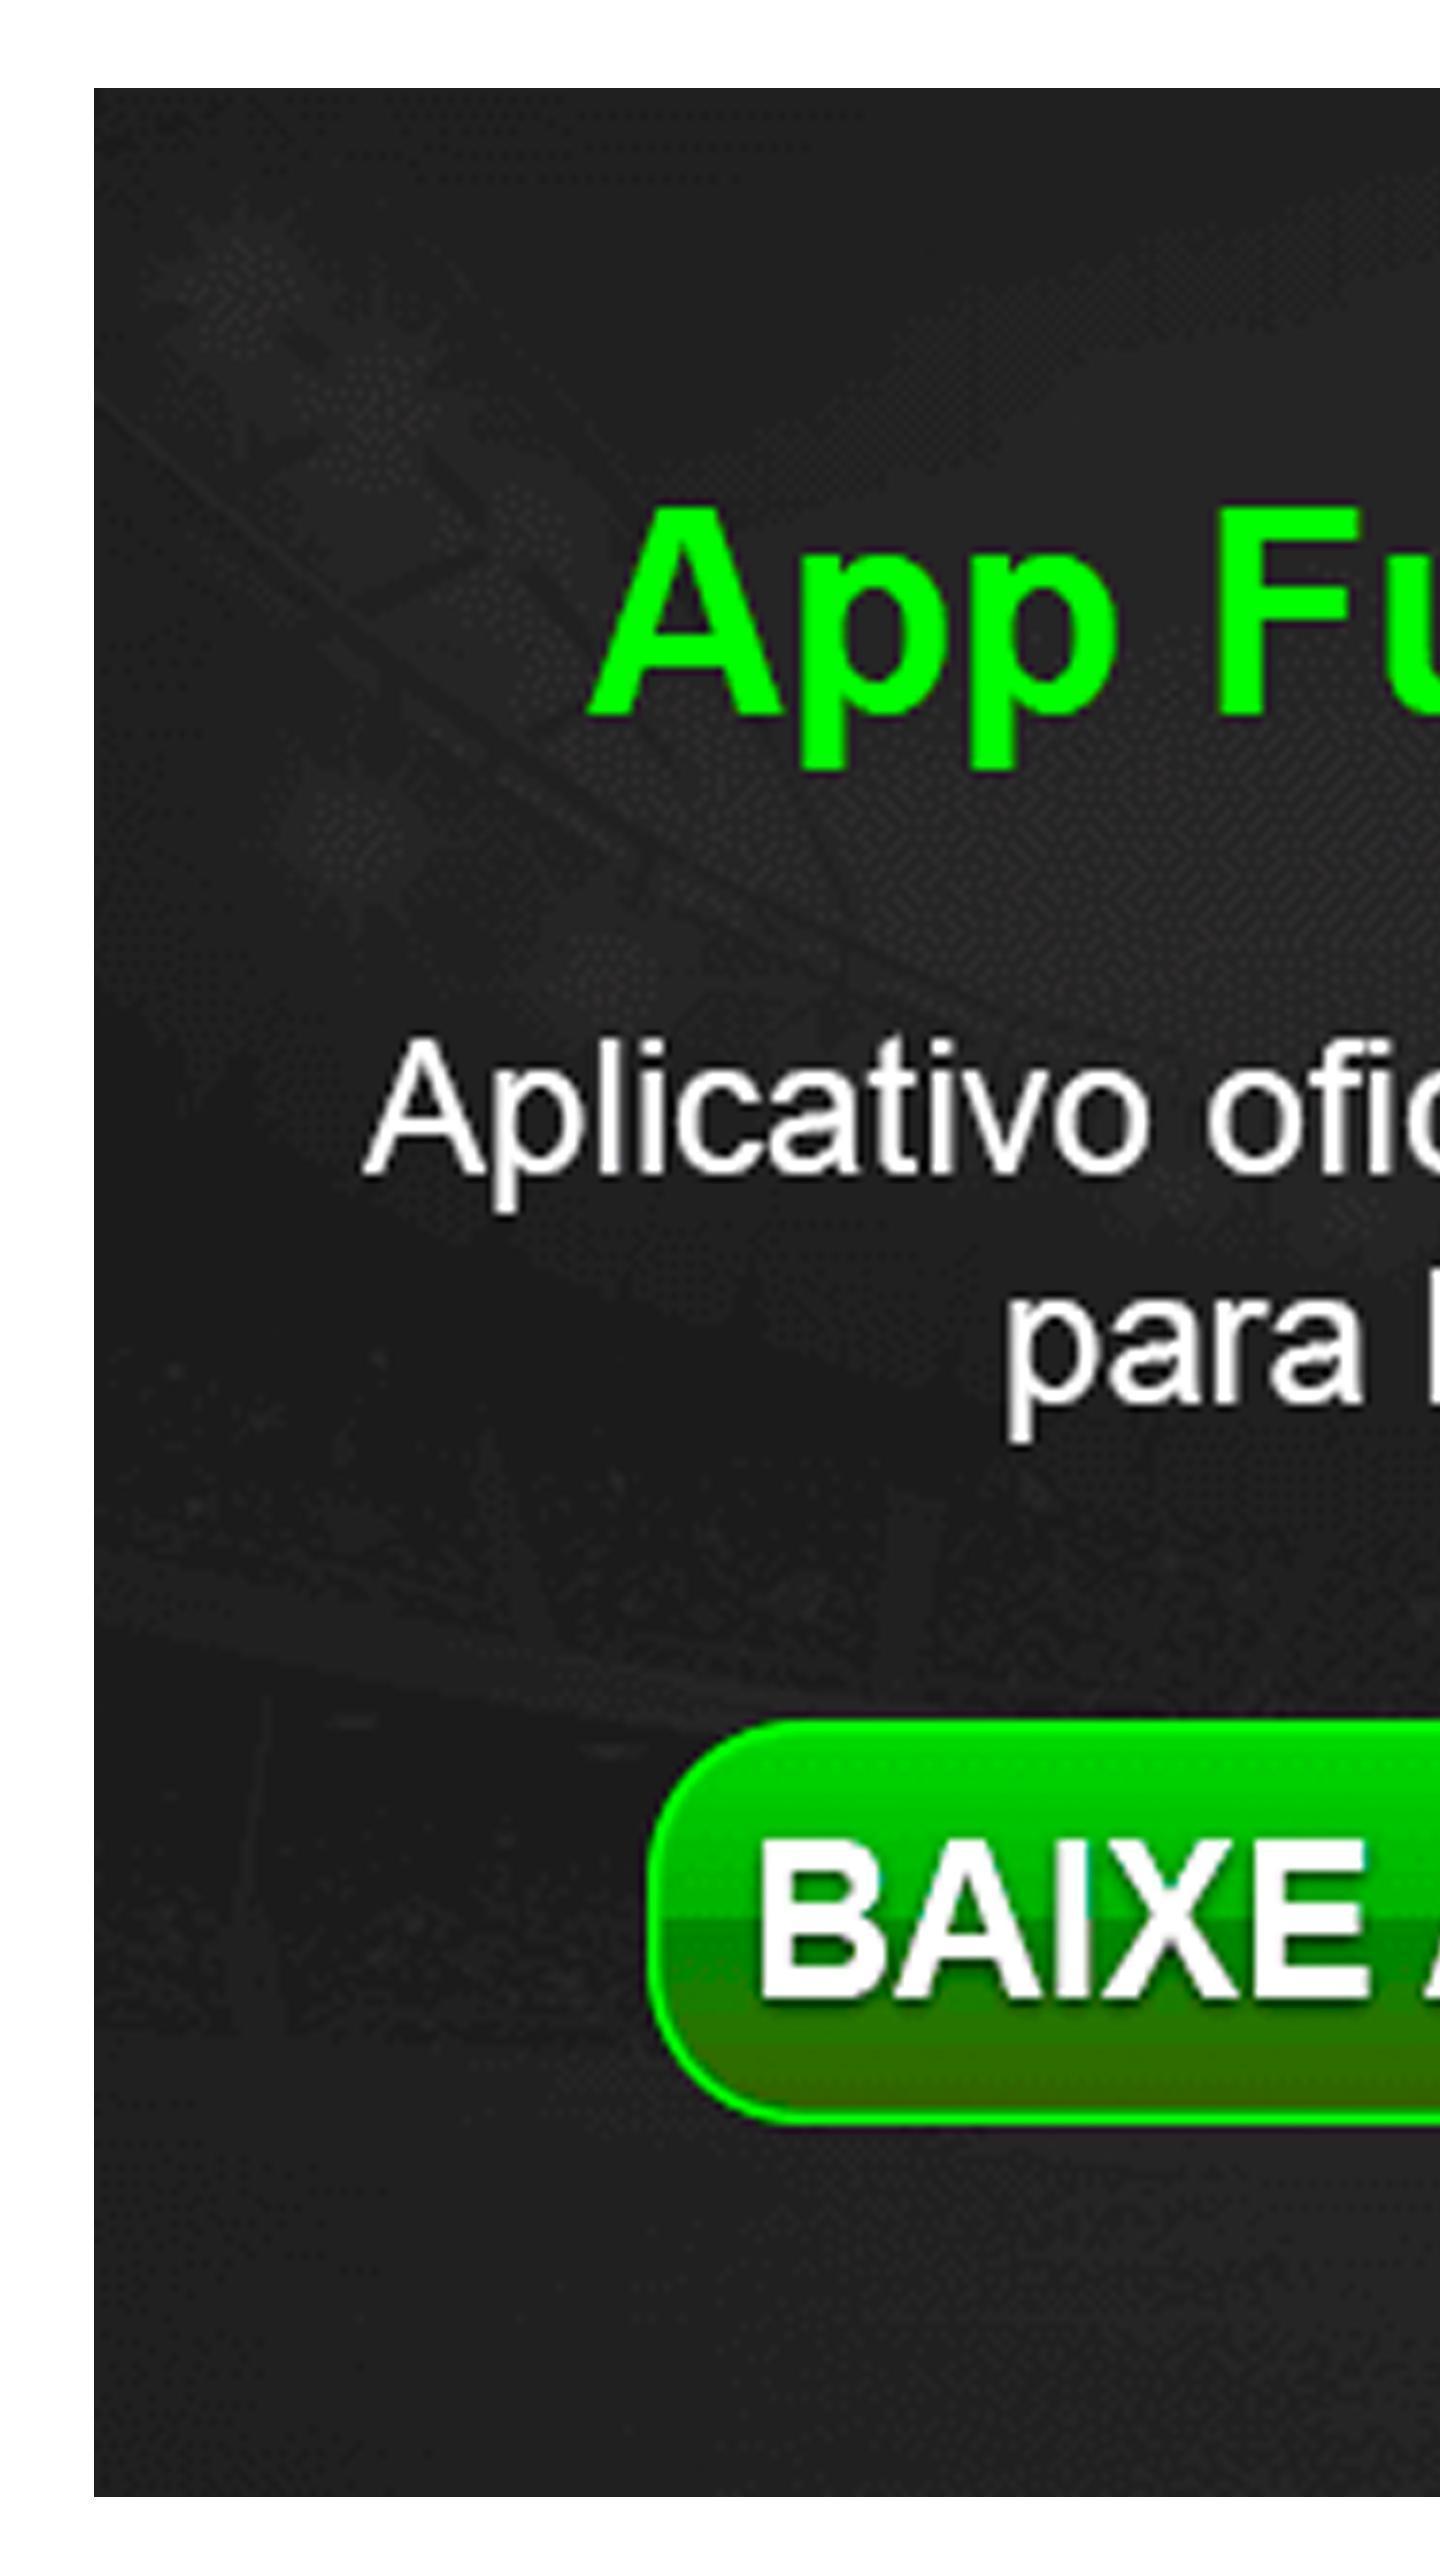 Download futemax futebol live guide android on PC